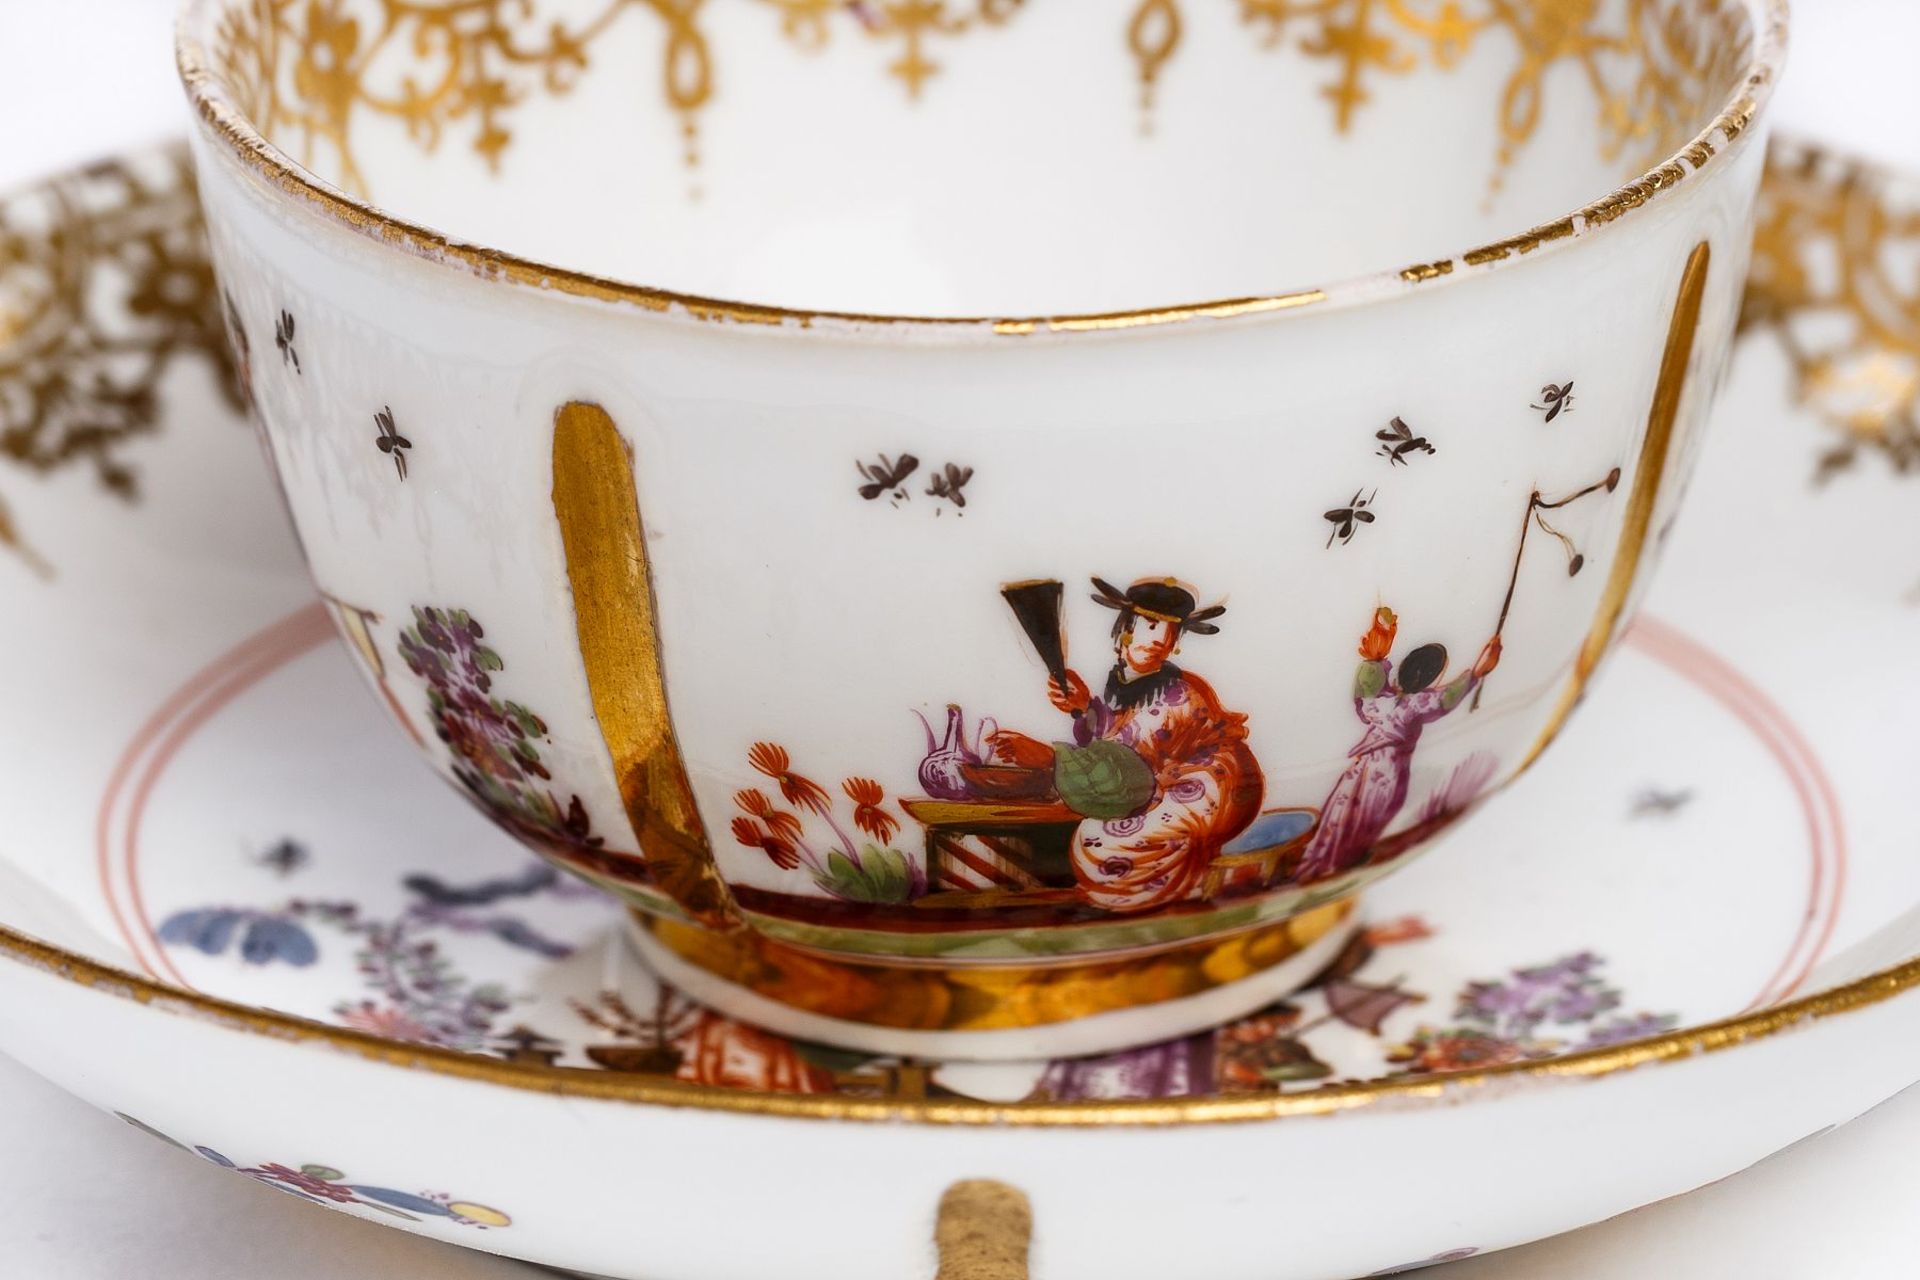 Coffee service with "Chinoiserie" scenes by Johann Gregorius Höroldt (1696-1775), Meissen - Image 8 of 22